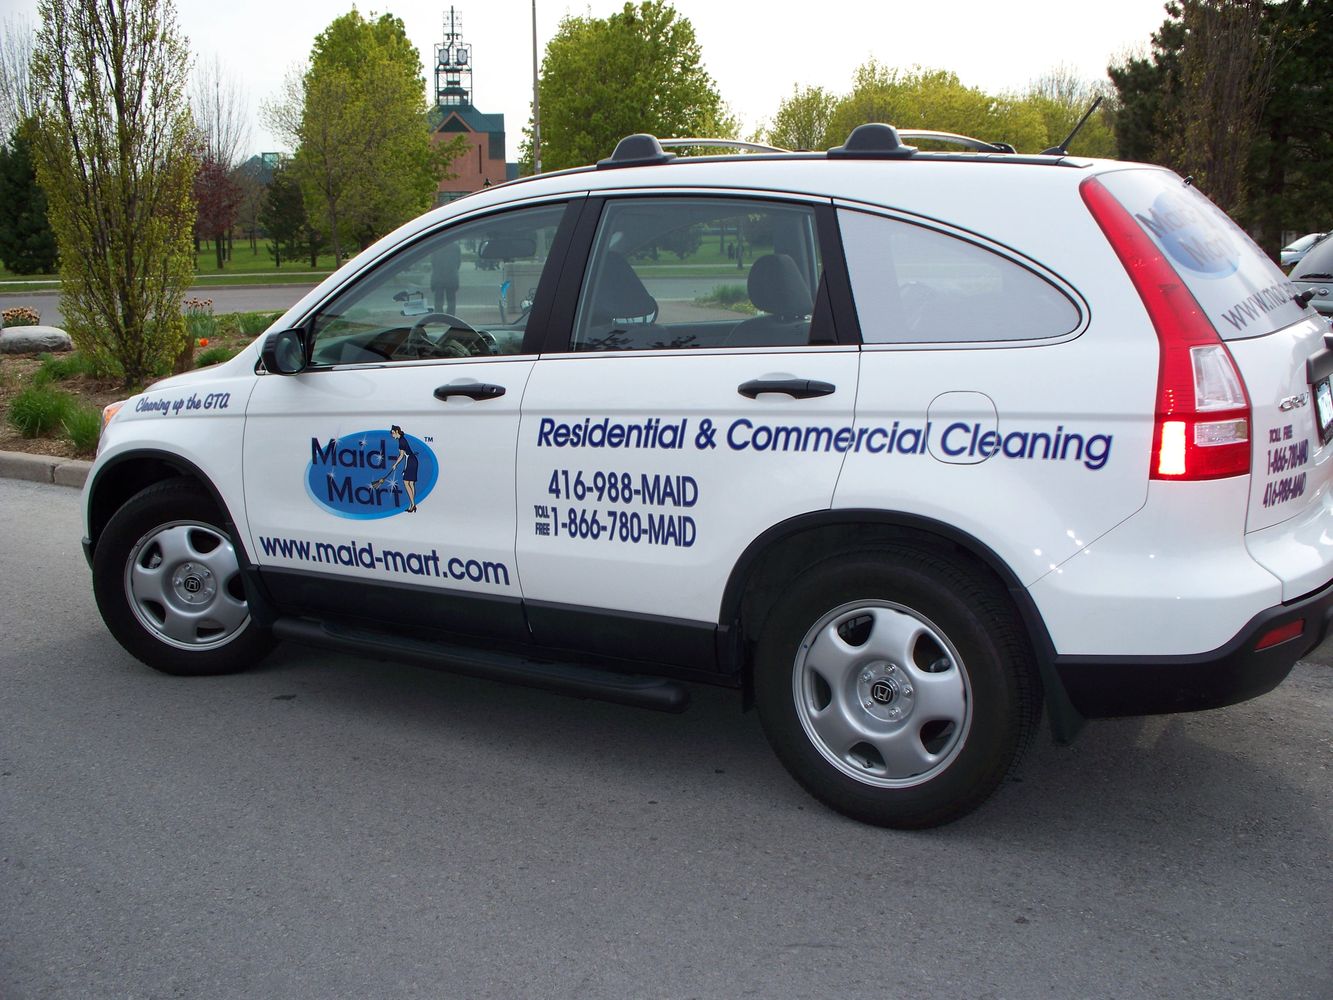 Maid Maid residential and commercial cleaning in the GTA.  Janitorial, buildings, construction, maid